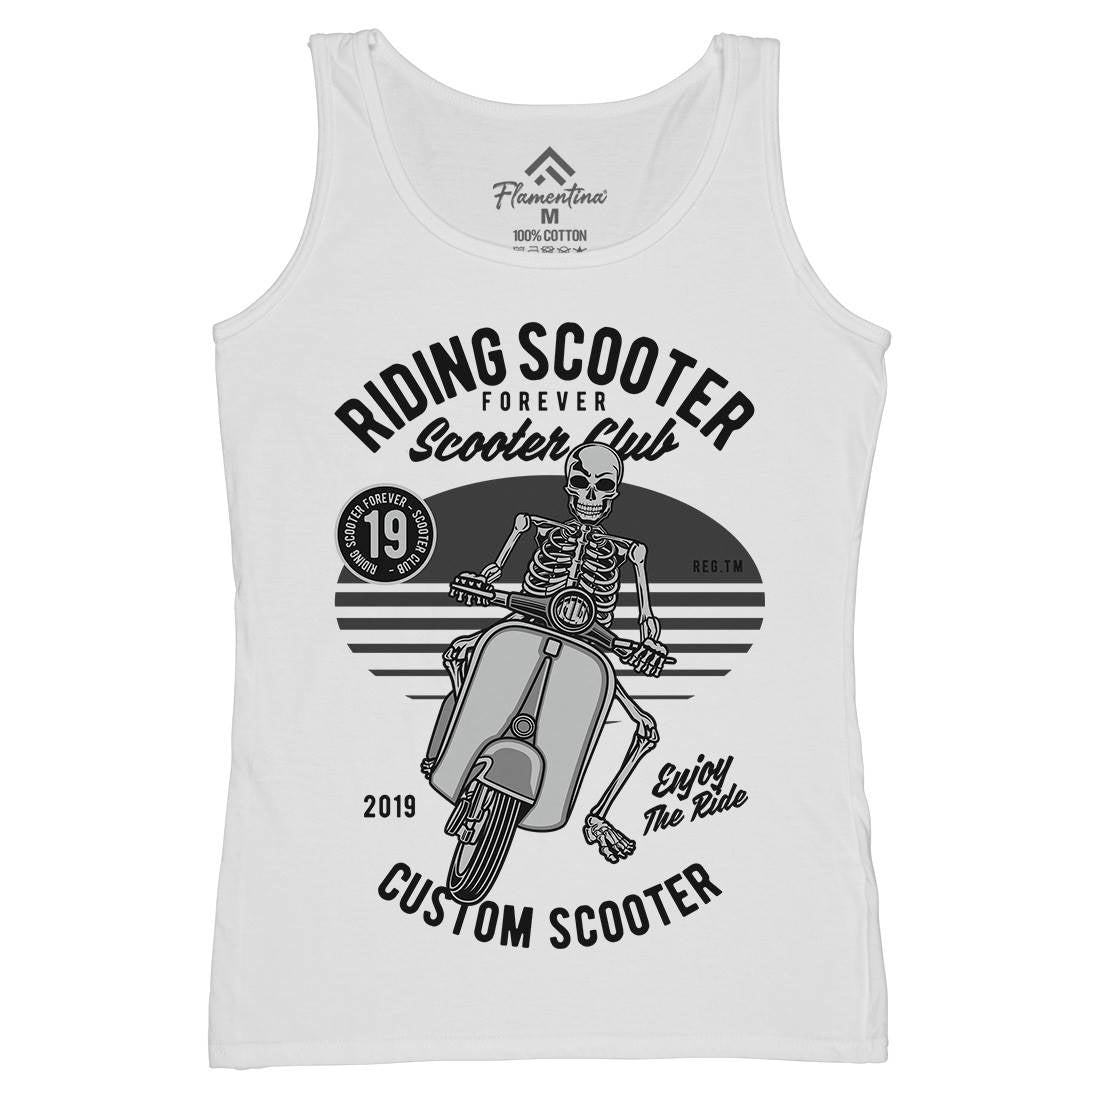 Riding Scooter Womens Organic Tank Top Vest Motorcycles D570